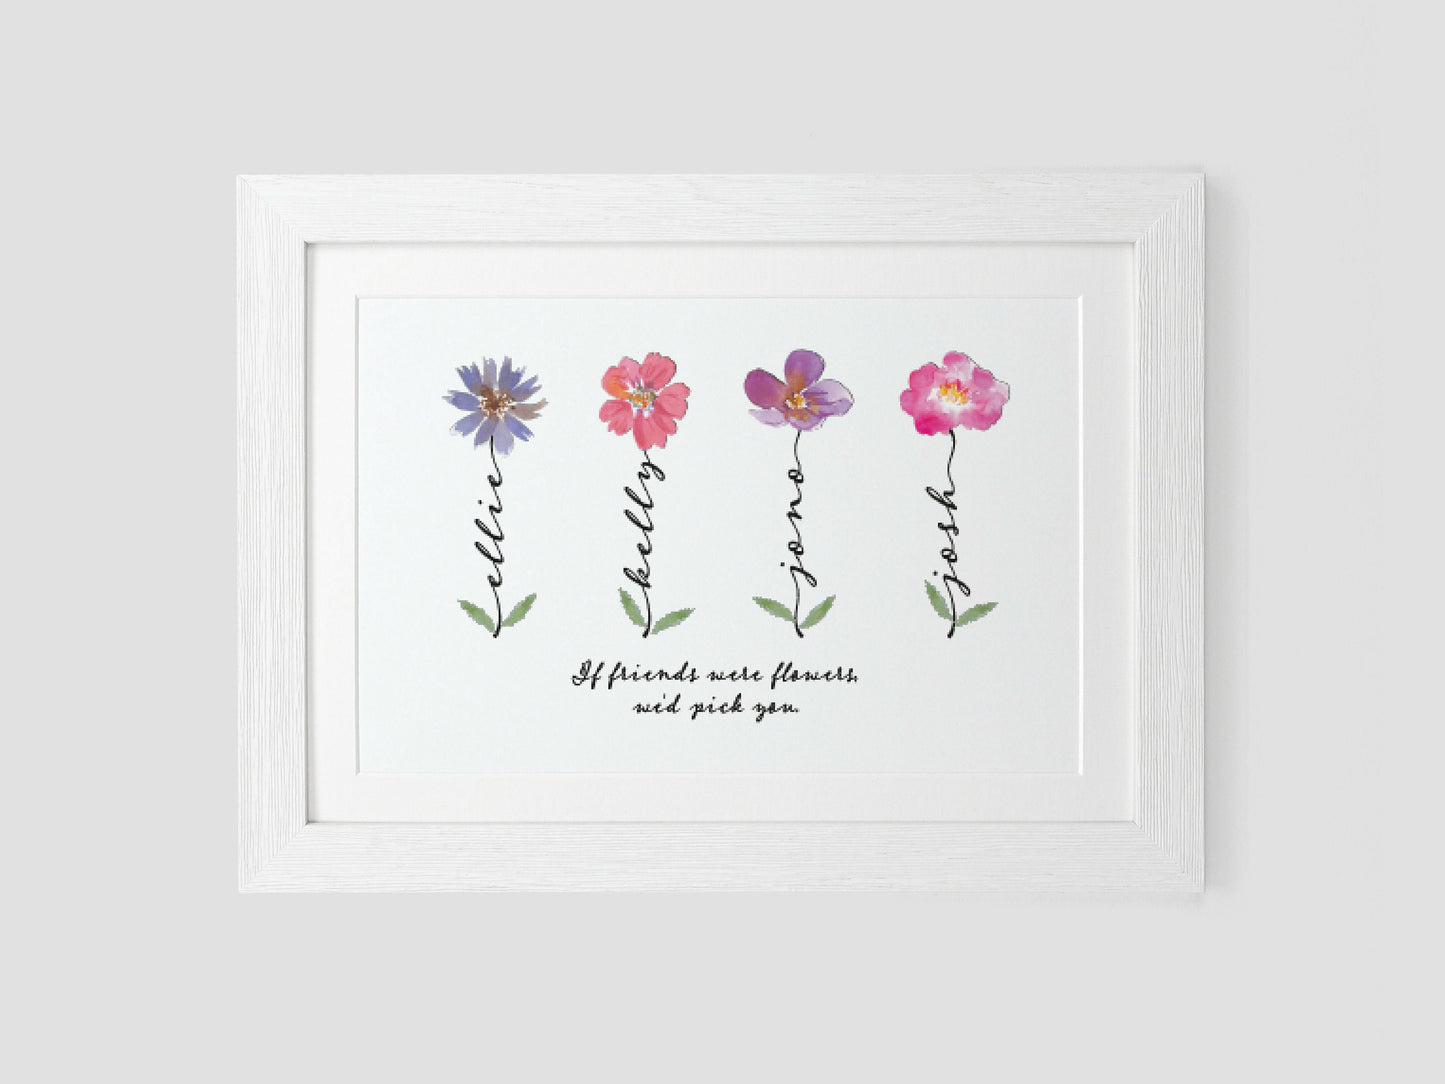 Friends gift | Best friend flower print | Personalised gift for friend | Group of friends | Friendship Present *CHOICE OF 22 FLOWERS* VA019